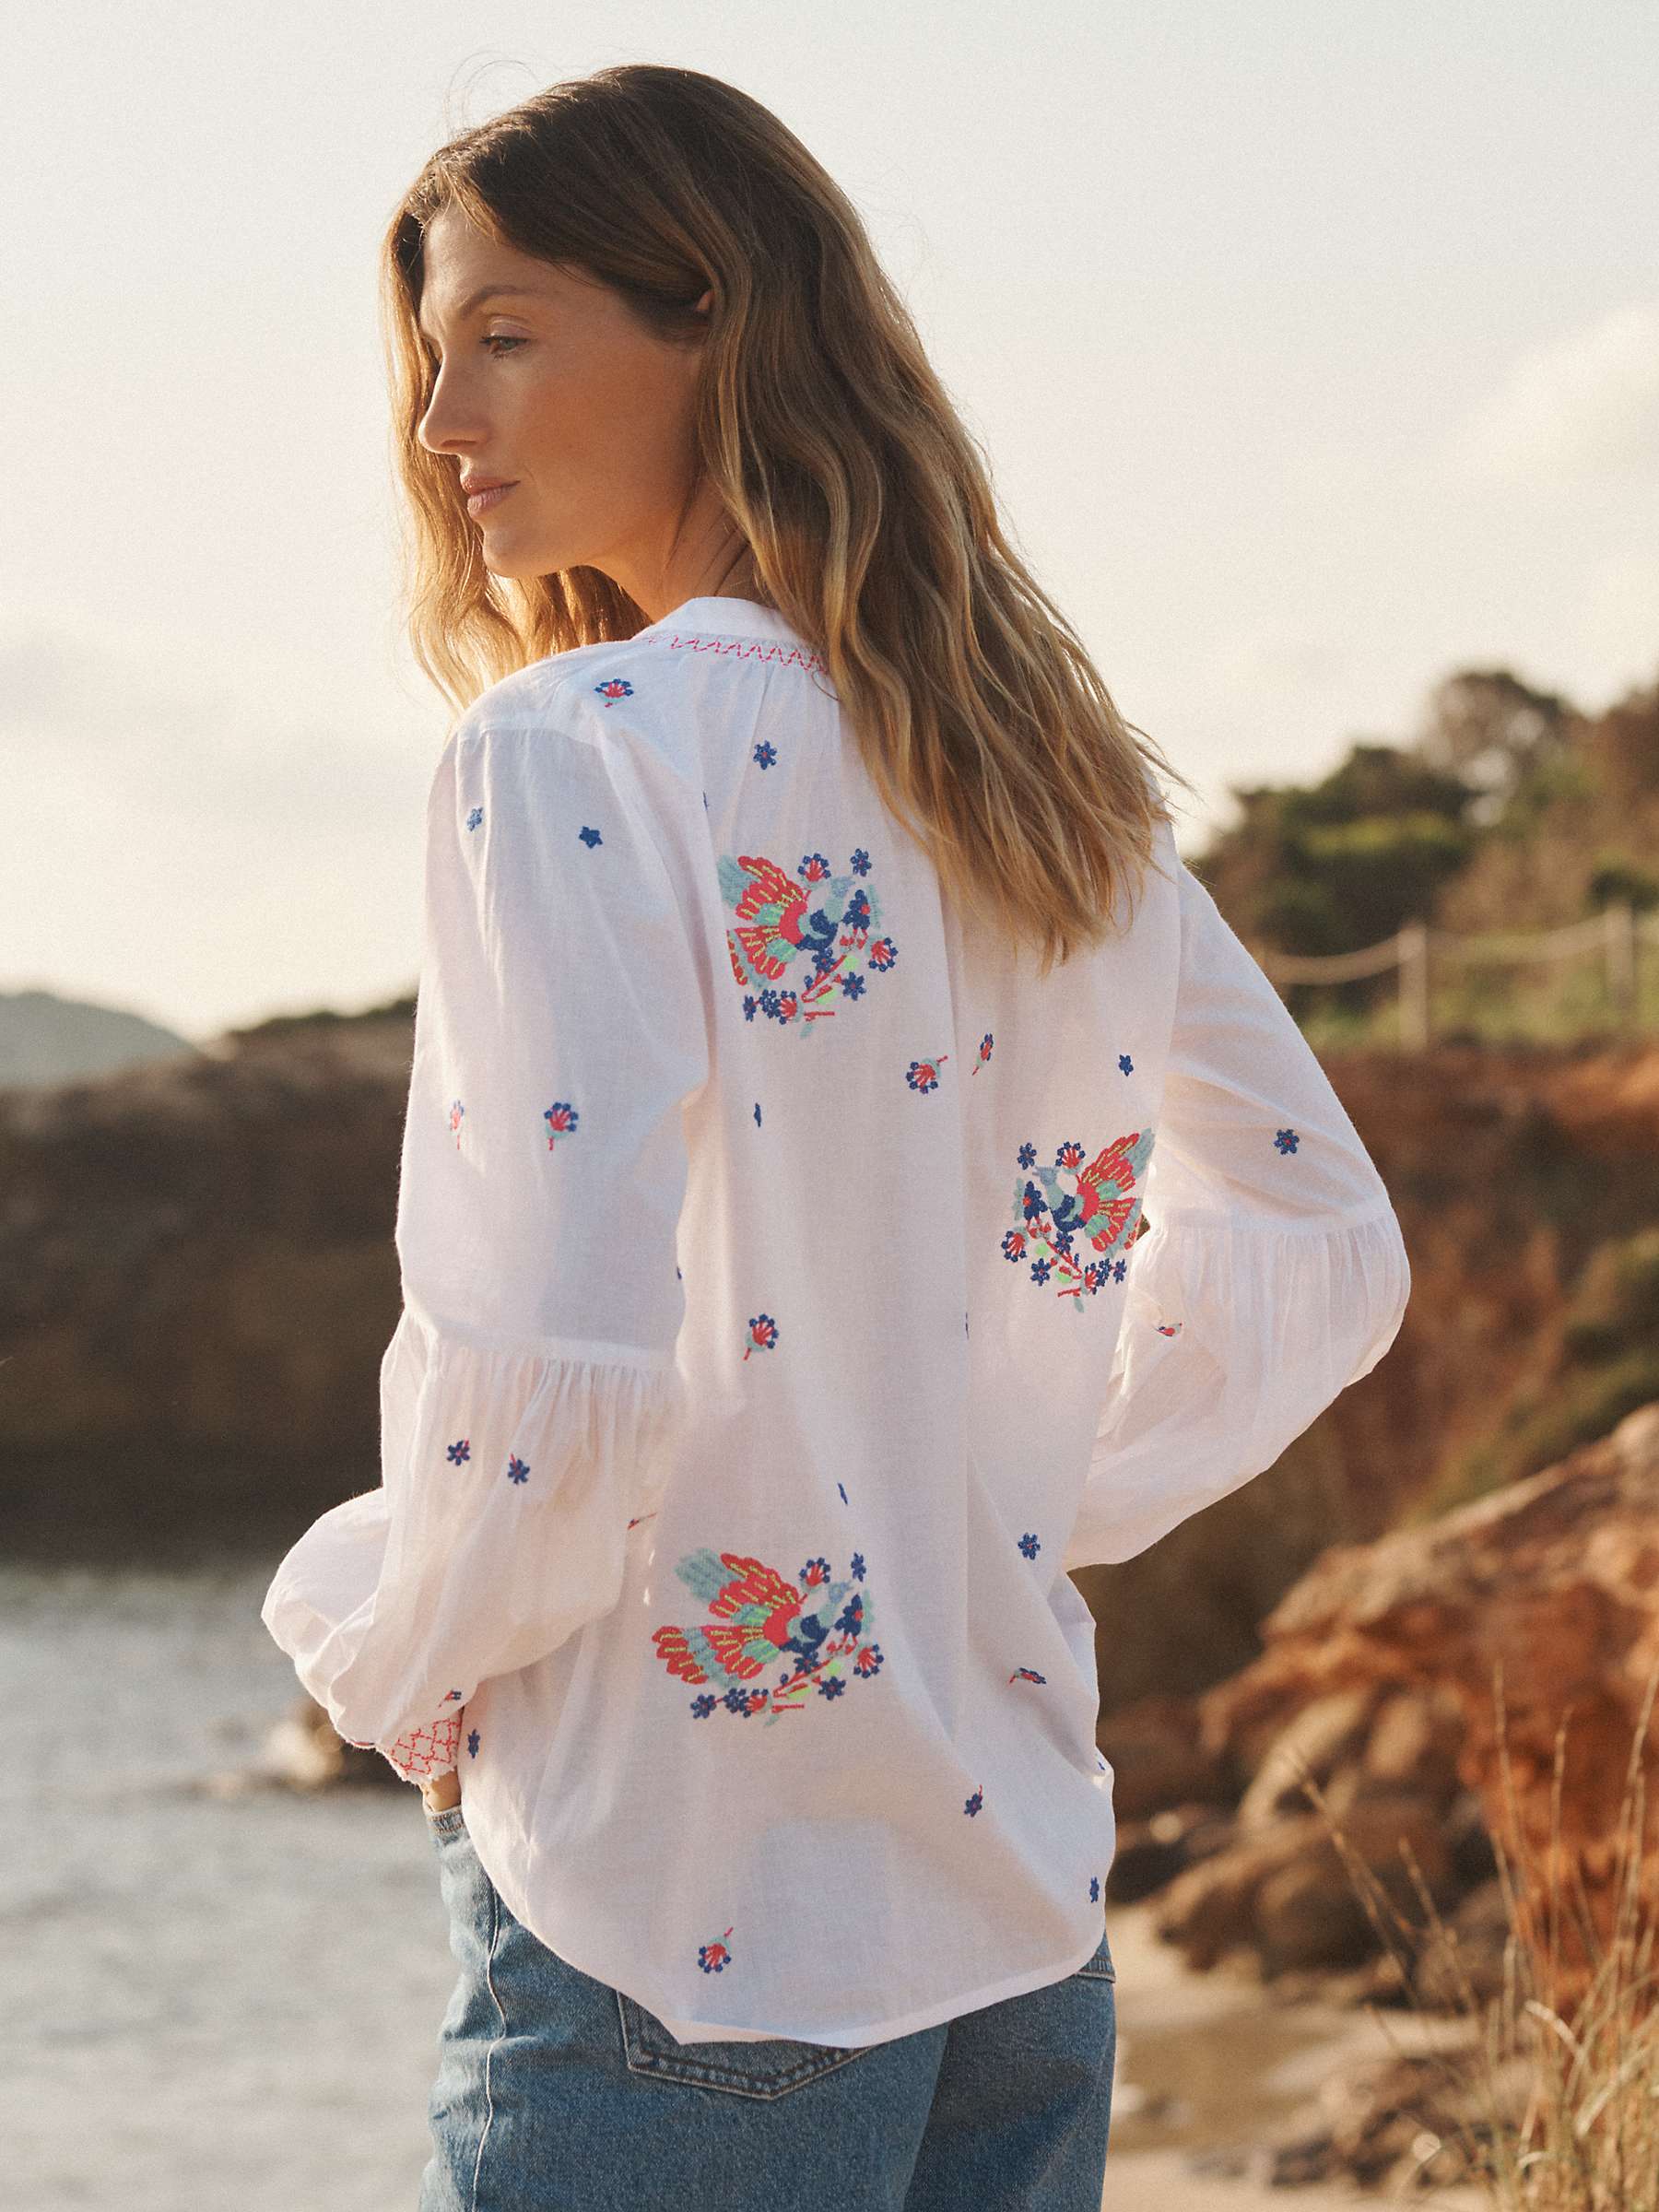 Buy NRBY Birdie Embroidered Top, White Online at johnlewis.com